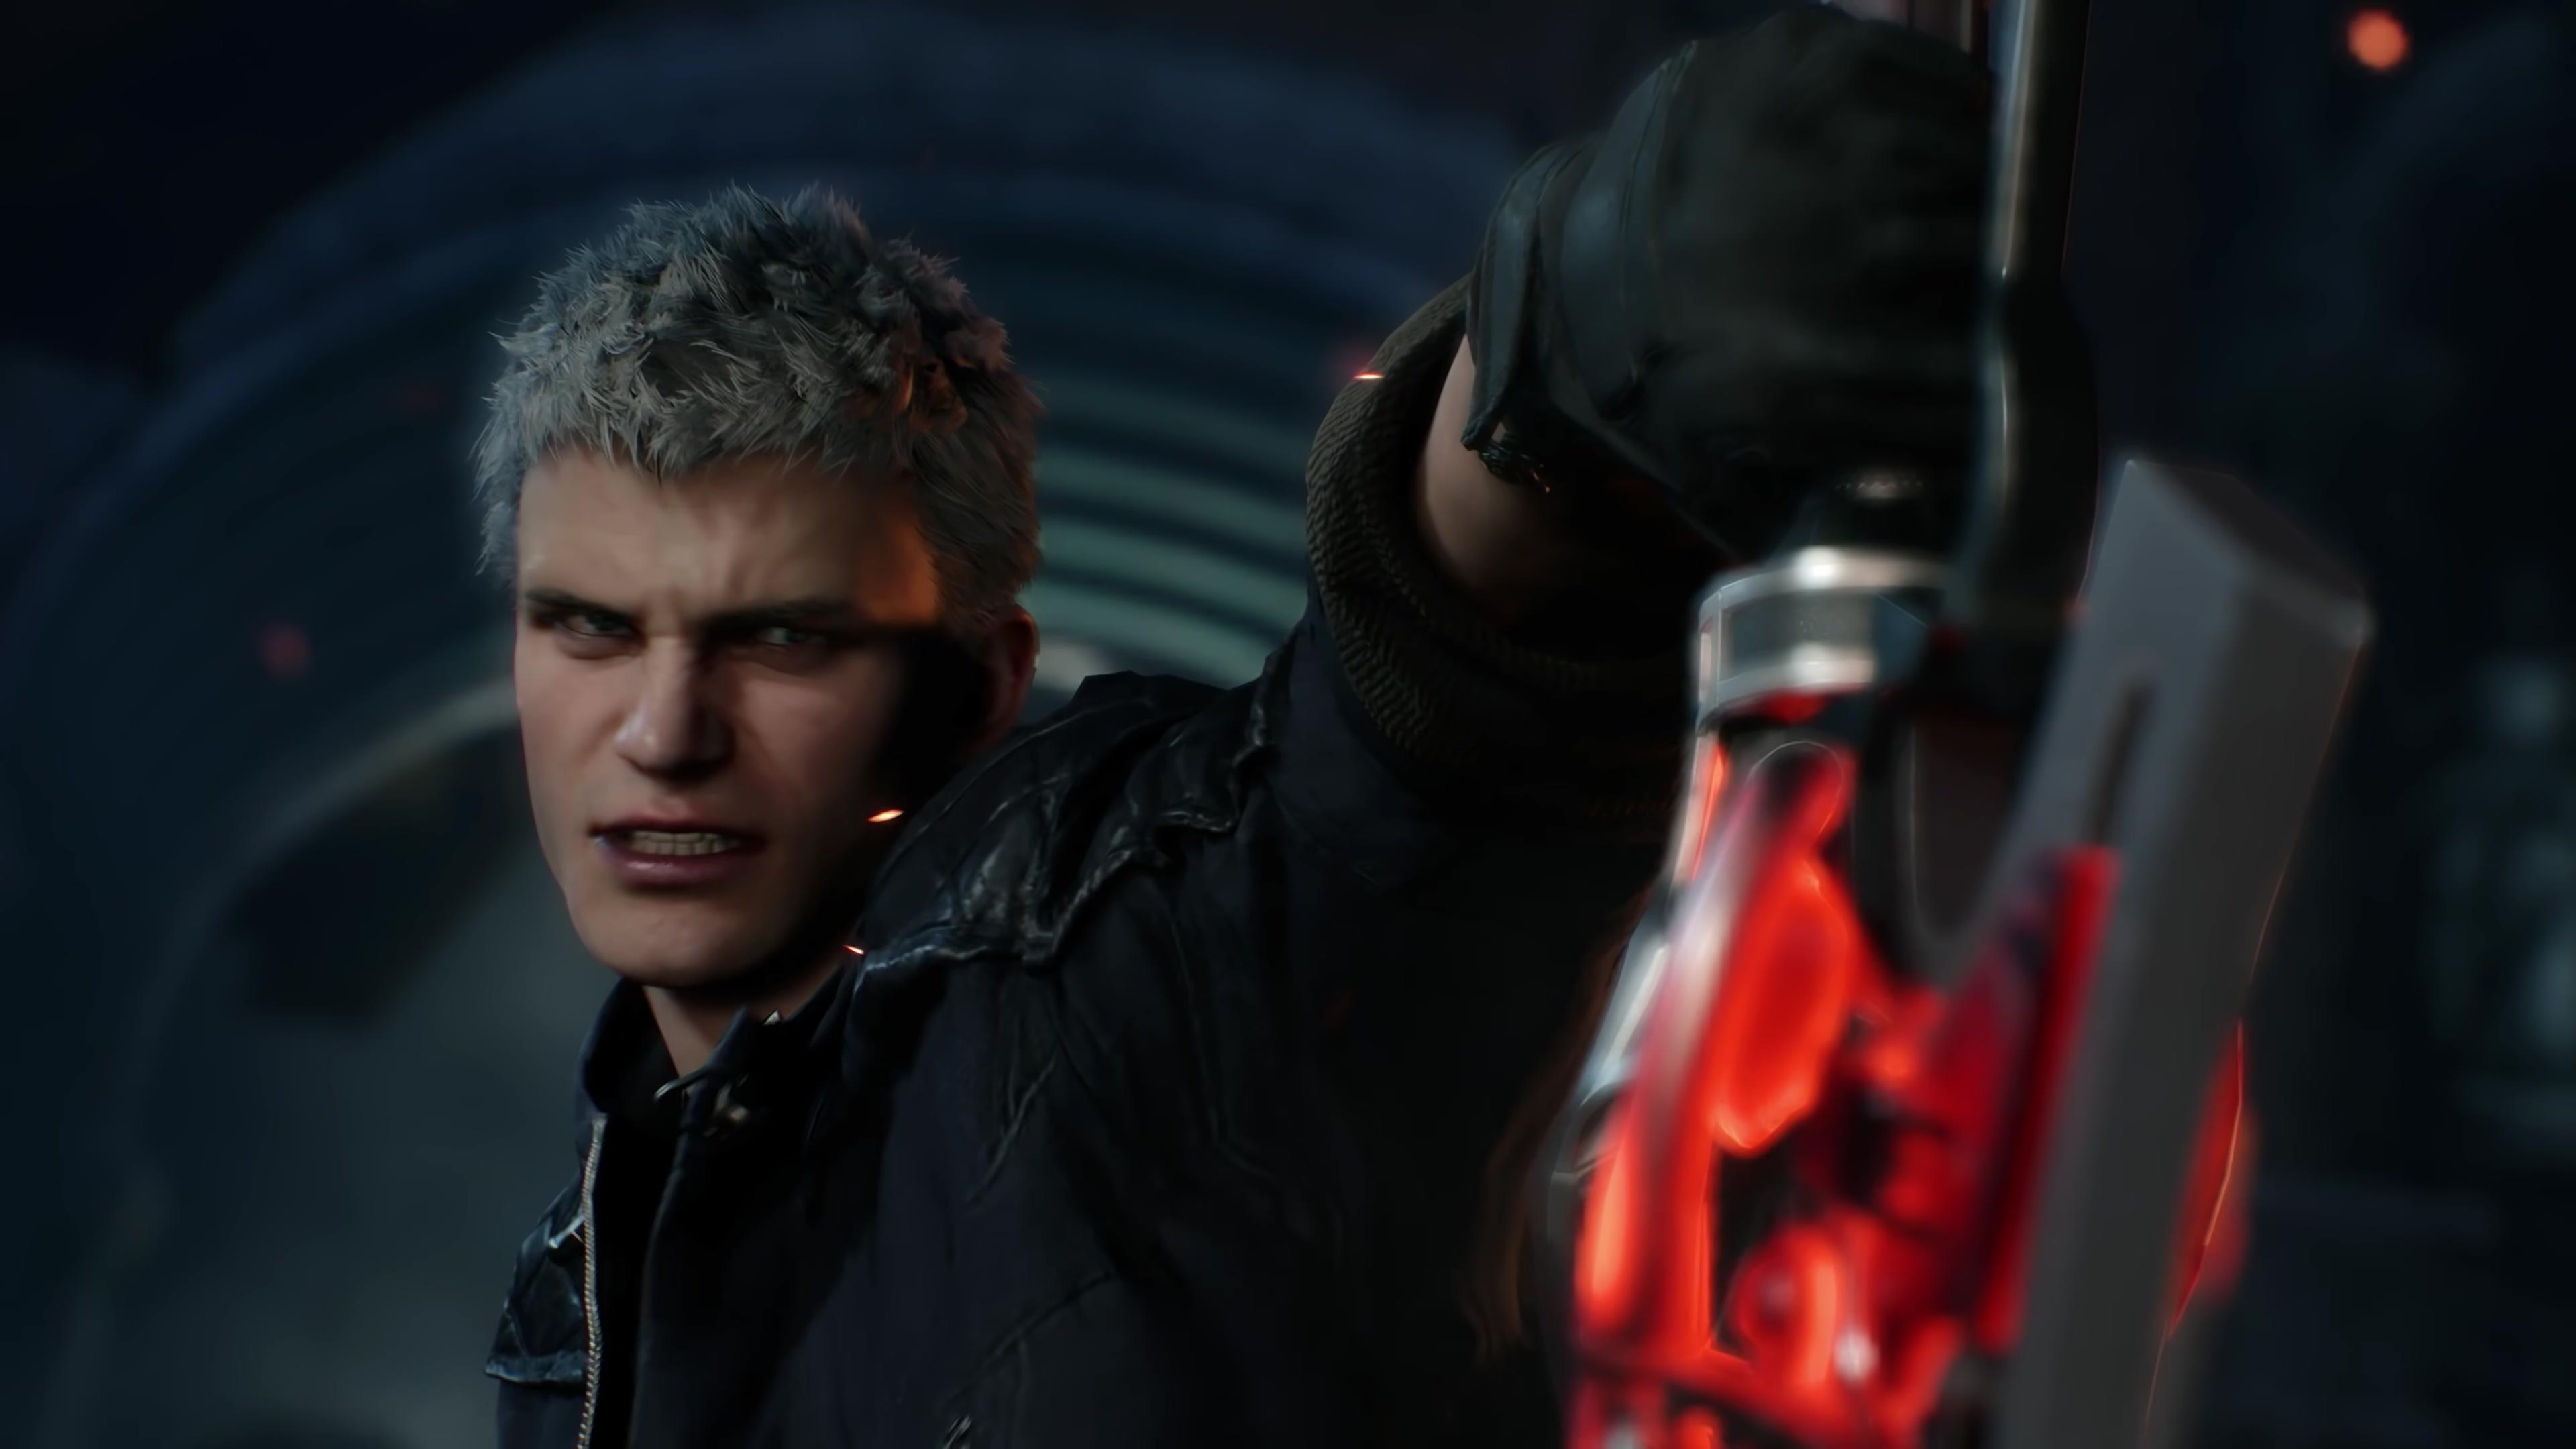 Devil May Cry 5 4k Ultra HD Wallpaper. Background